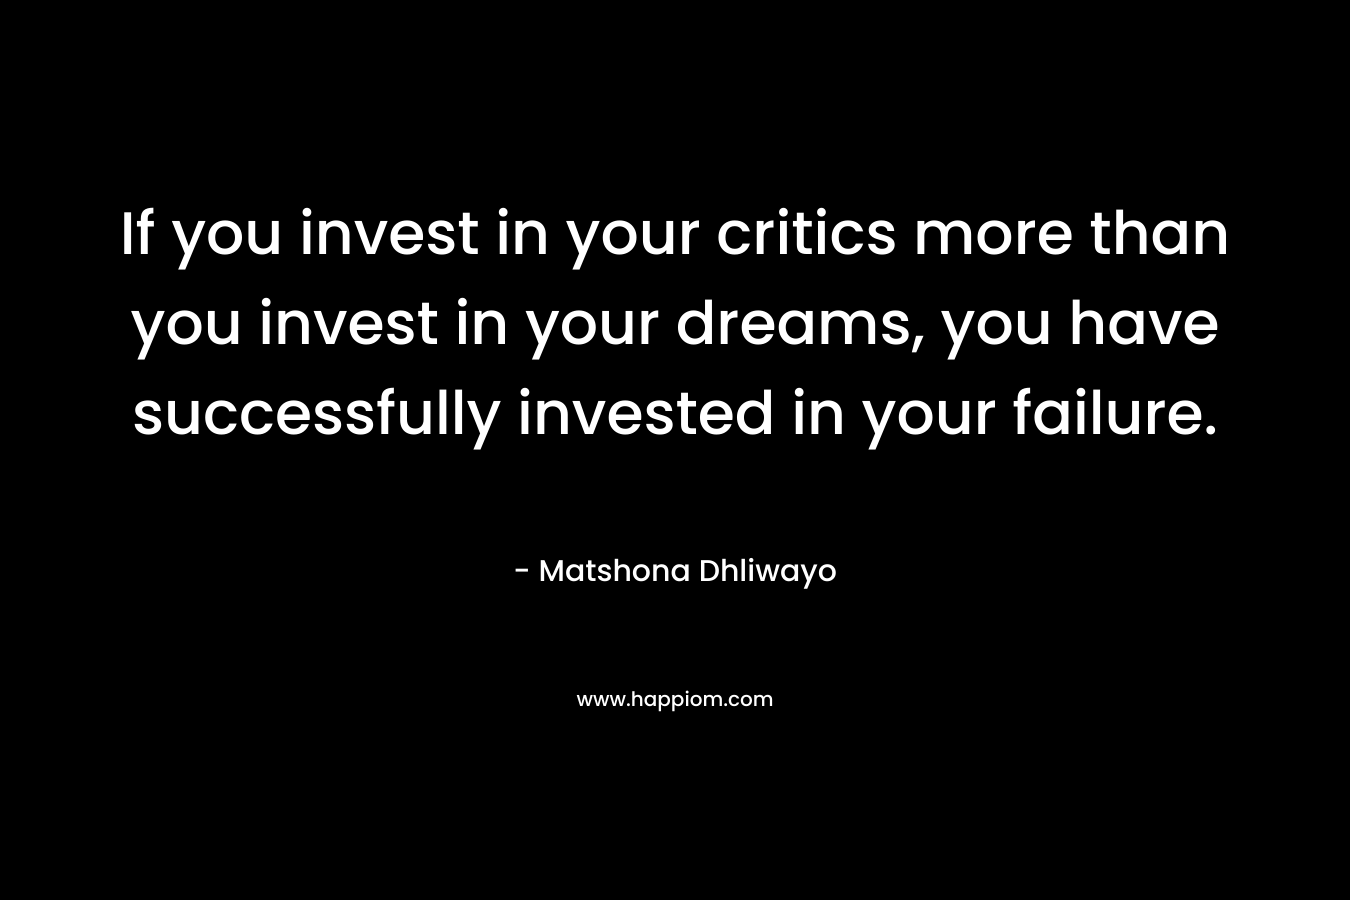 If you invest in your critics more than you invest in your dreams, you have successfully invested in your failure. – Matshona Dhliwayo